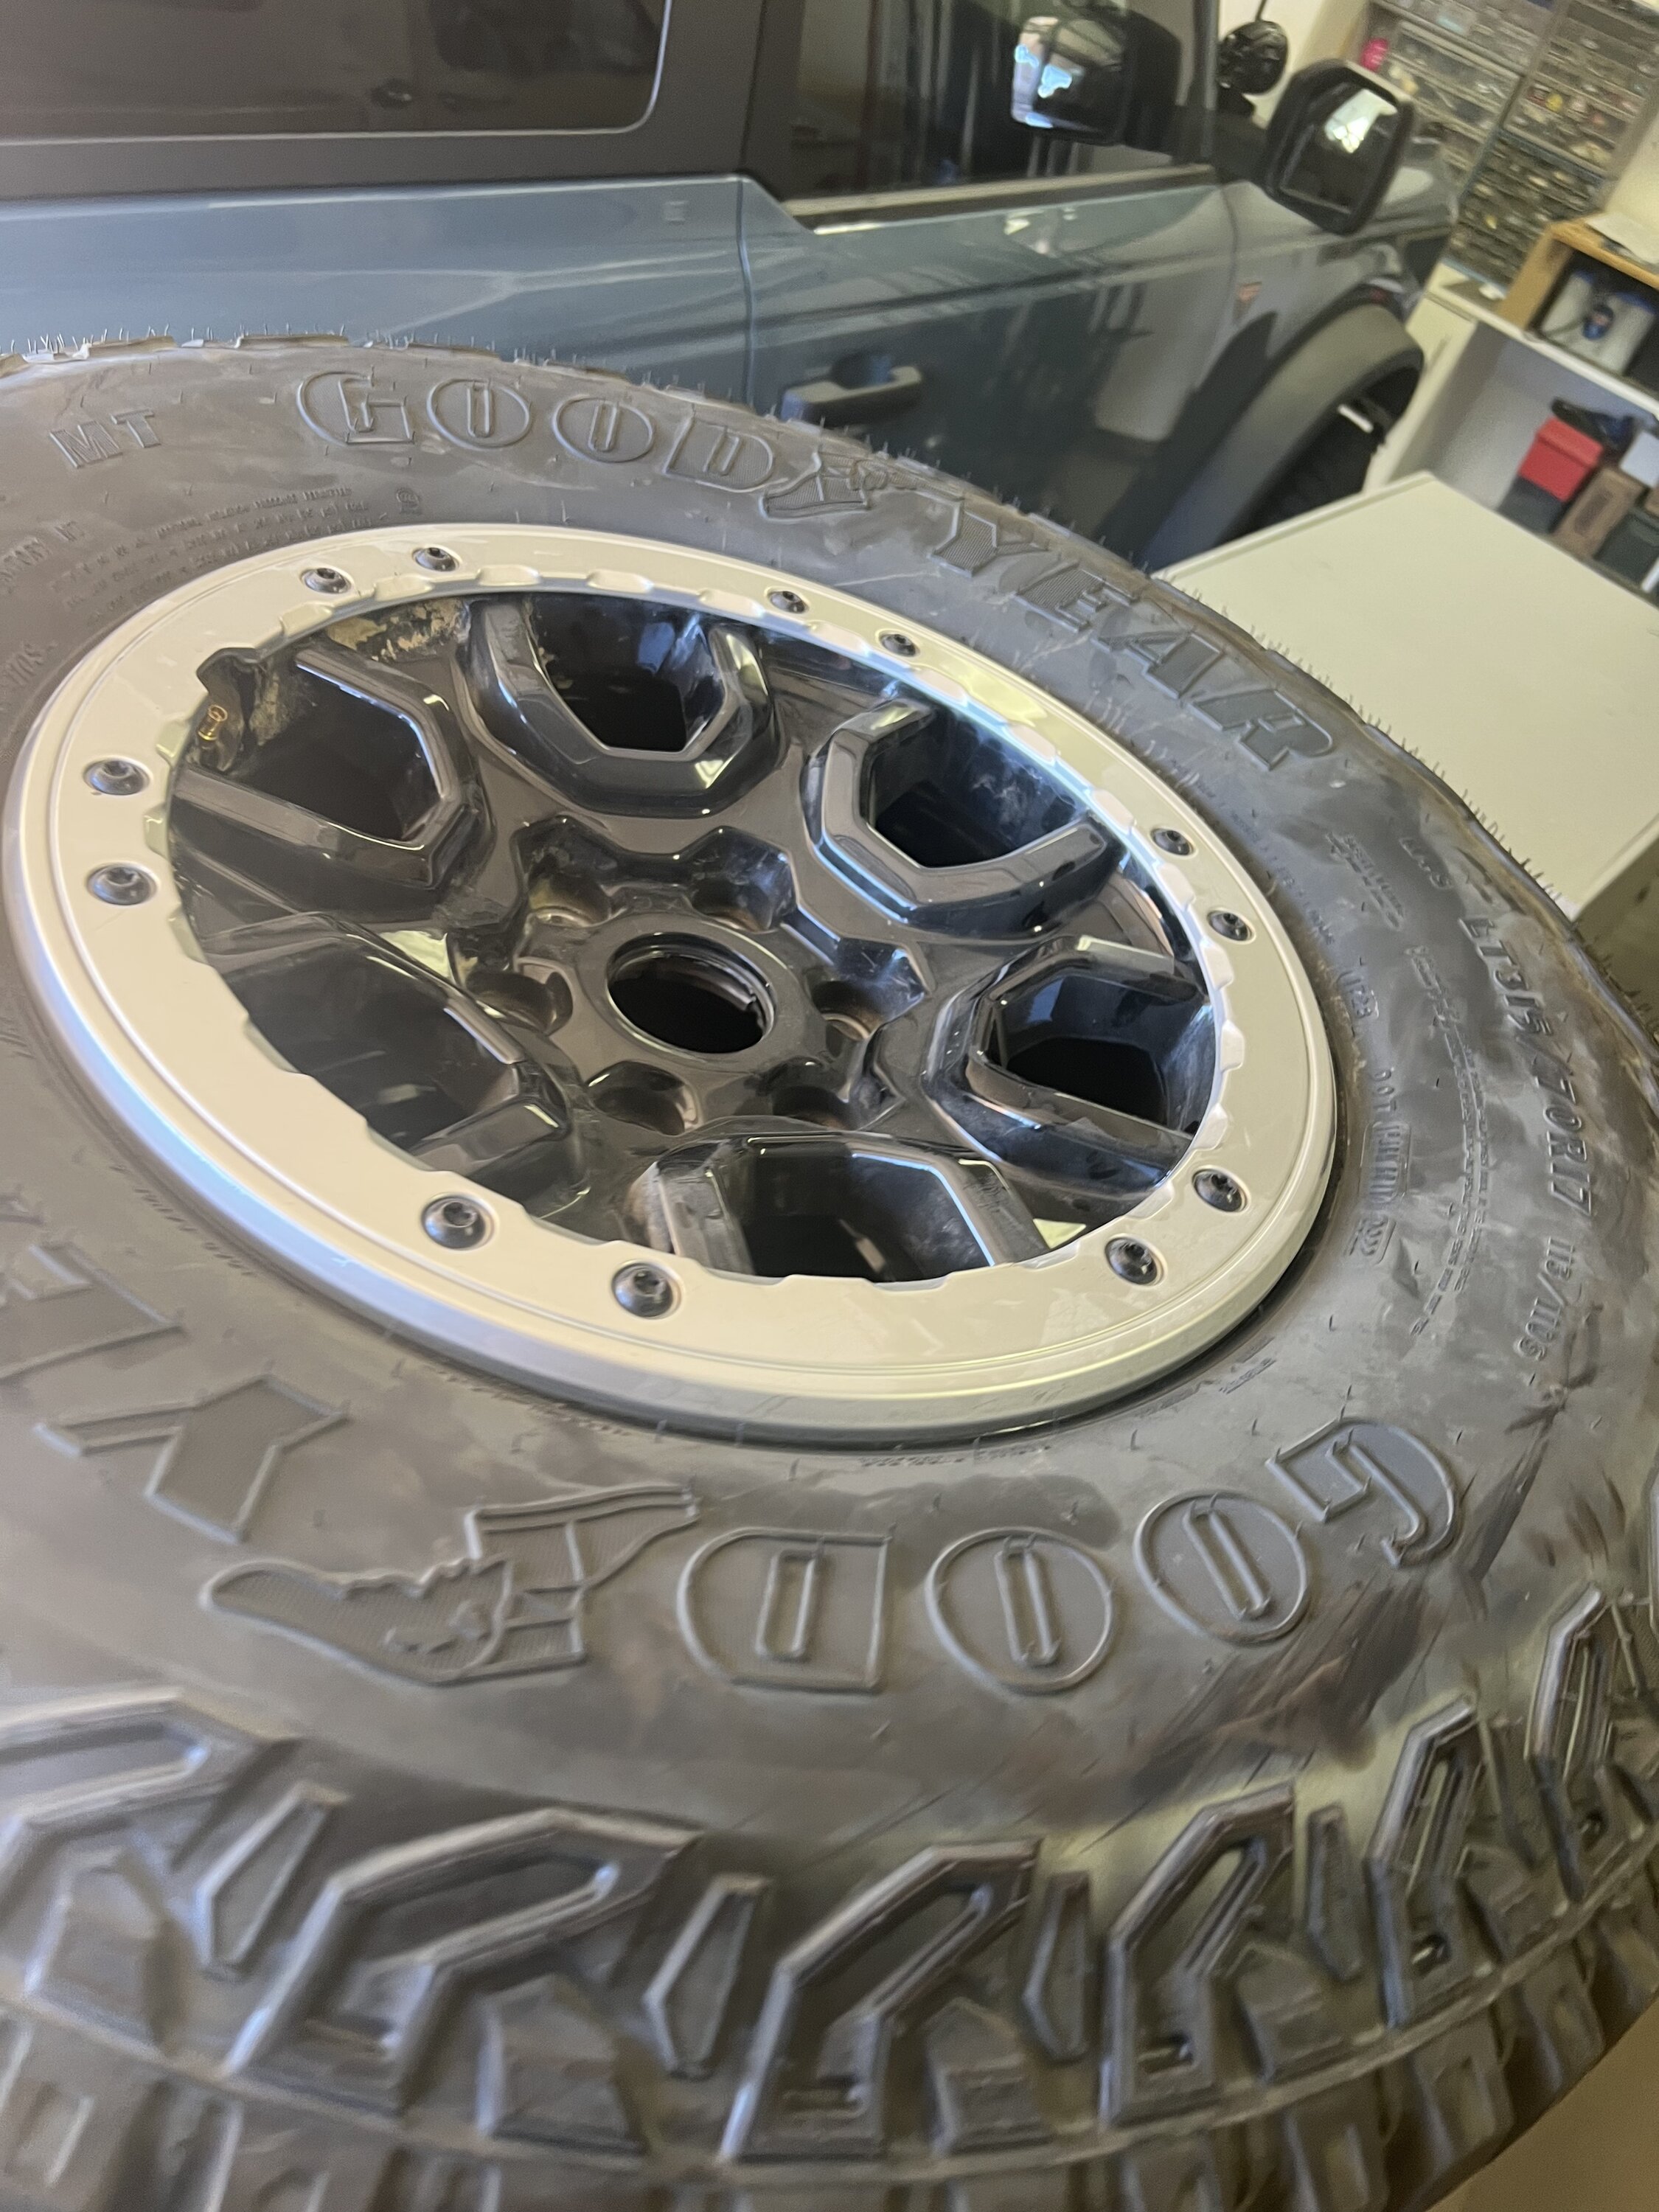 Ford Bronco Sasquatch wheels and tires for sale 315x7Rx17 take offs. $1,600 obo DEE541C9-F8E1-4B9D-AD77-FE149C3827FA